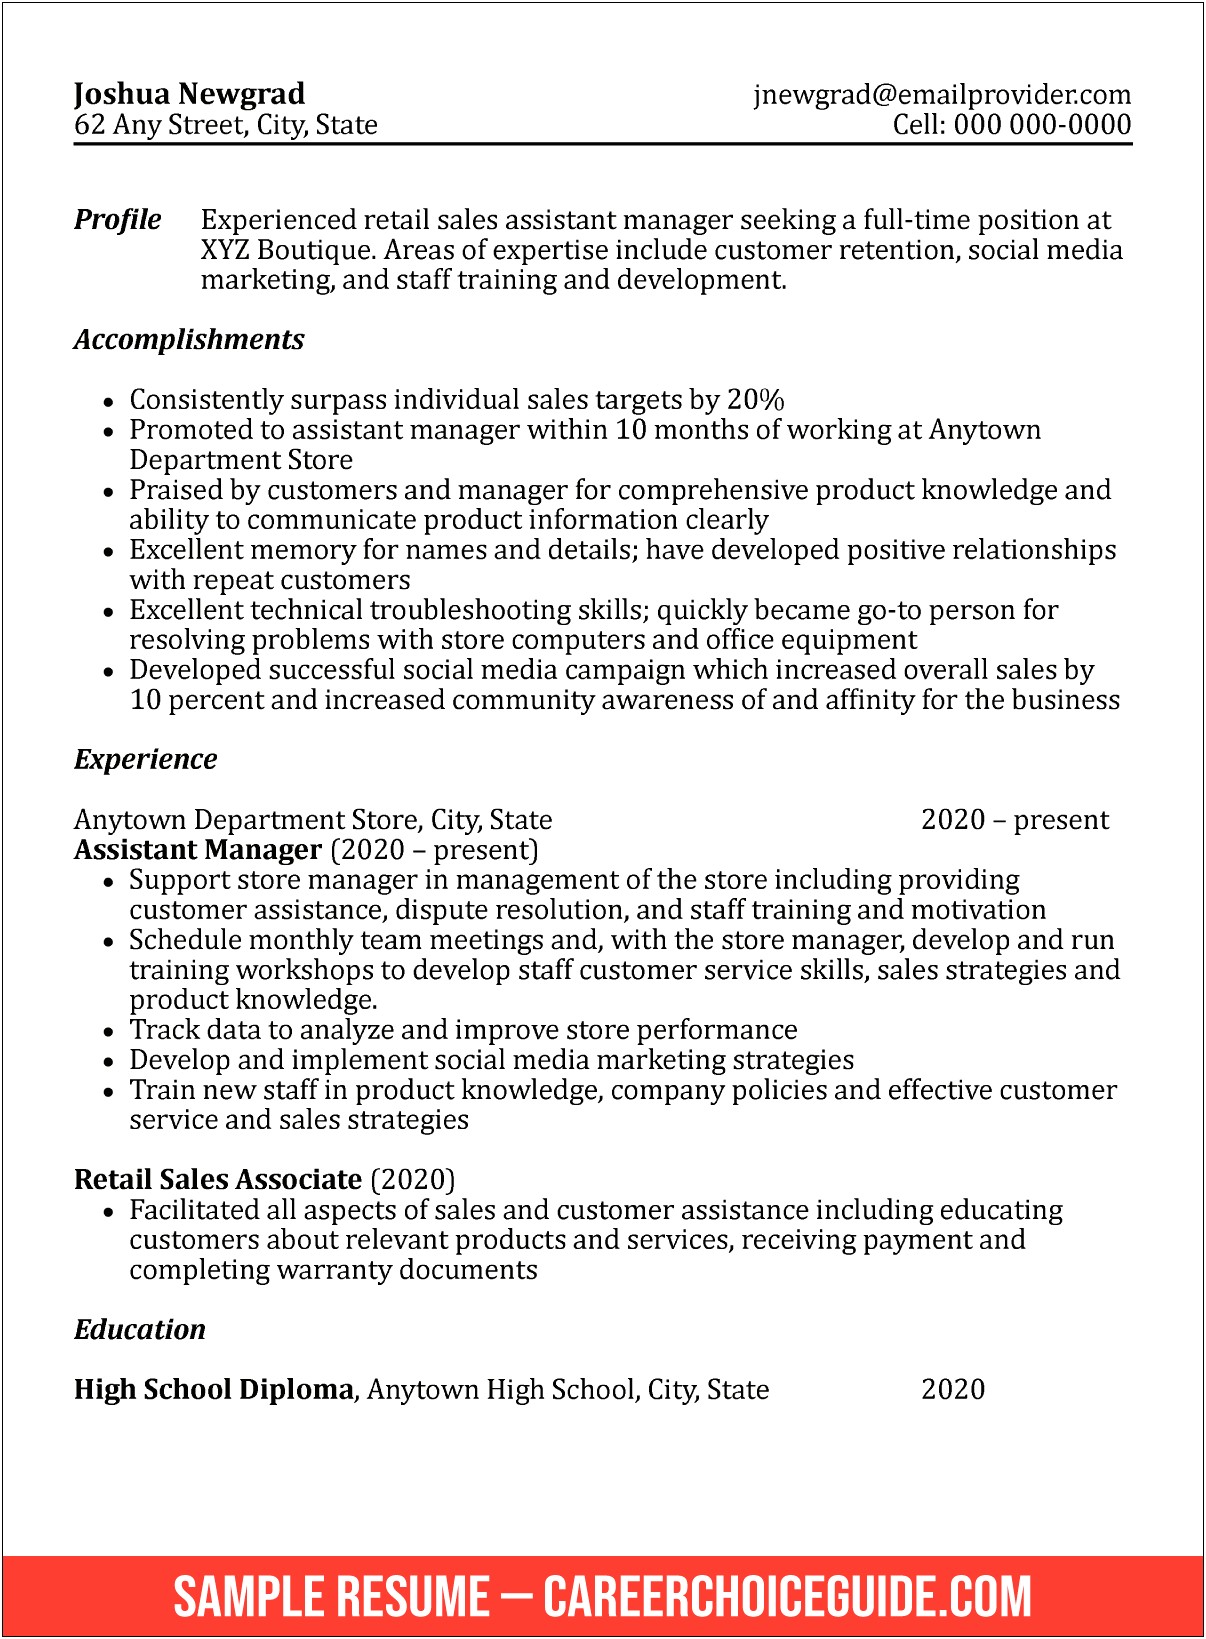 Sample Resume Examples For Highschool Students